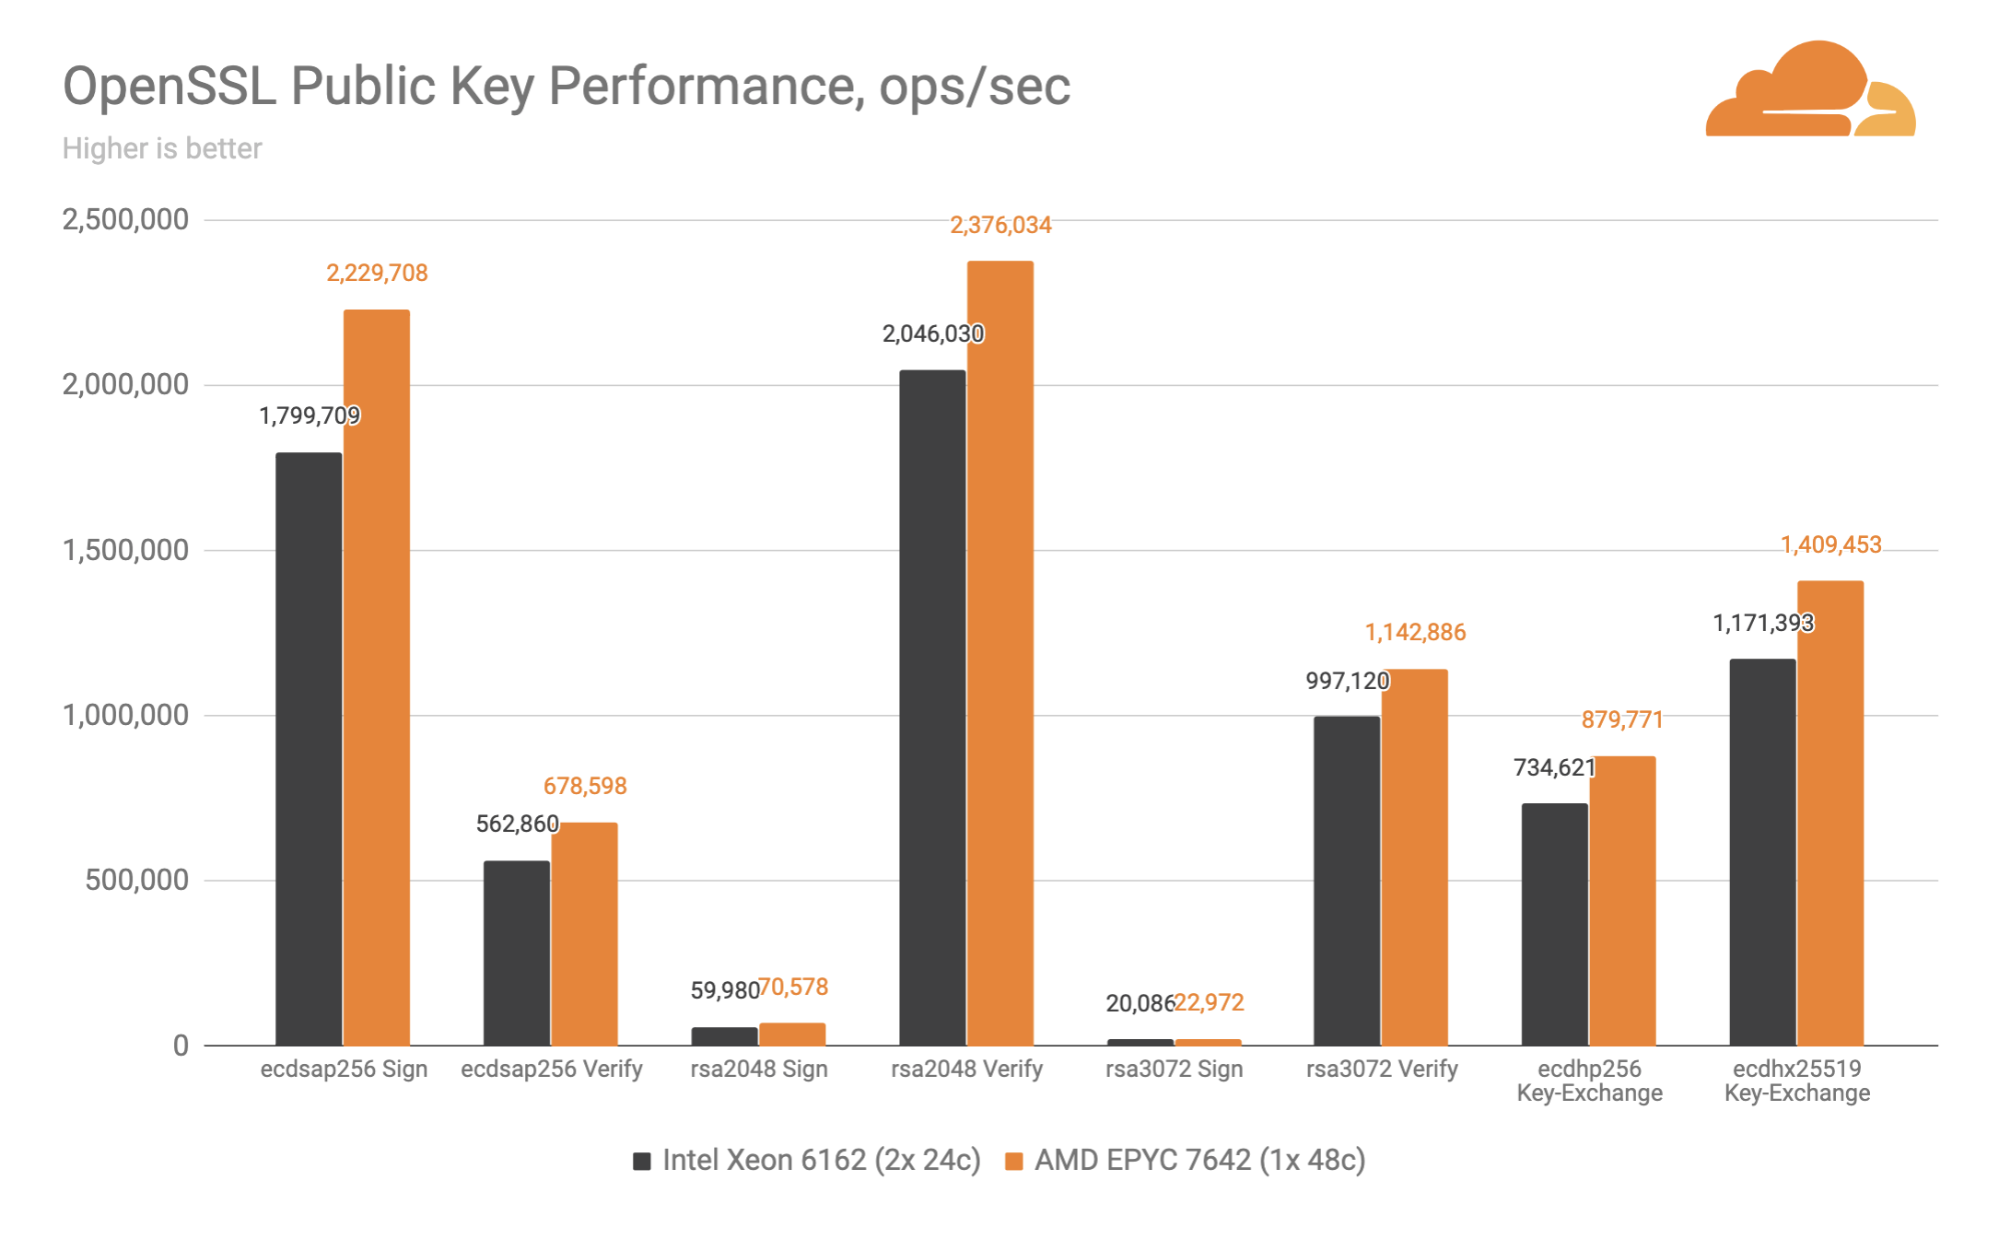 An EPYC trip to Rome: AMD is Cloudflare's 10th-generation Edge server CPU